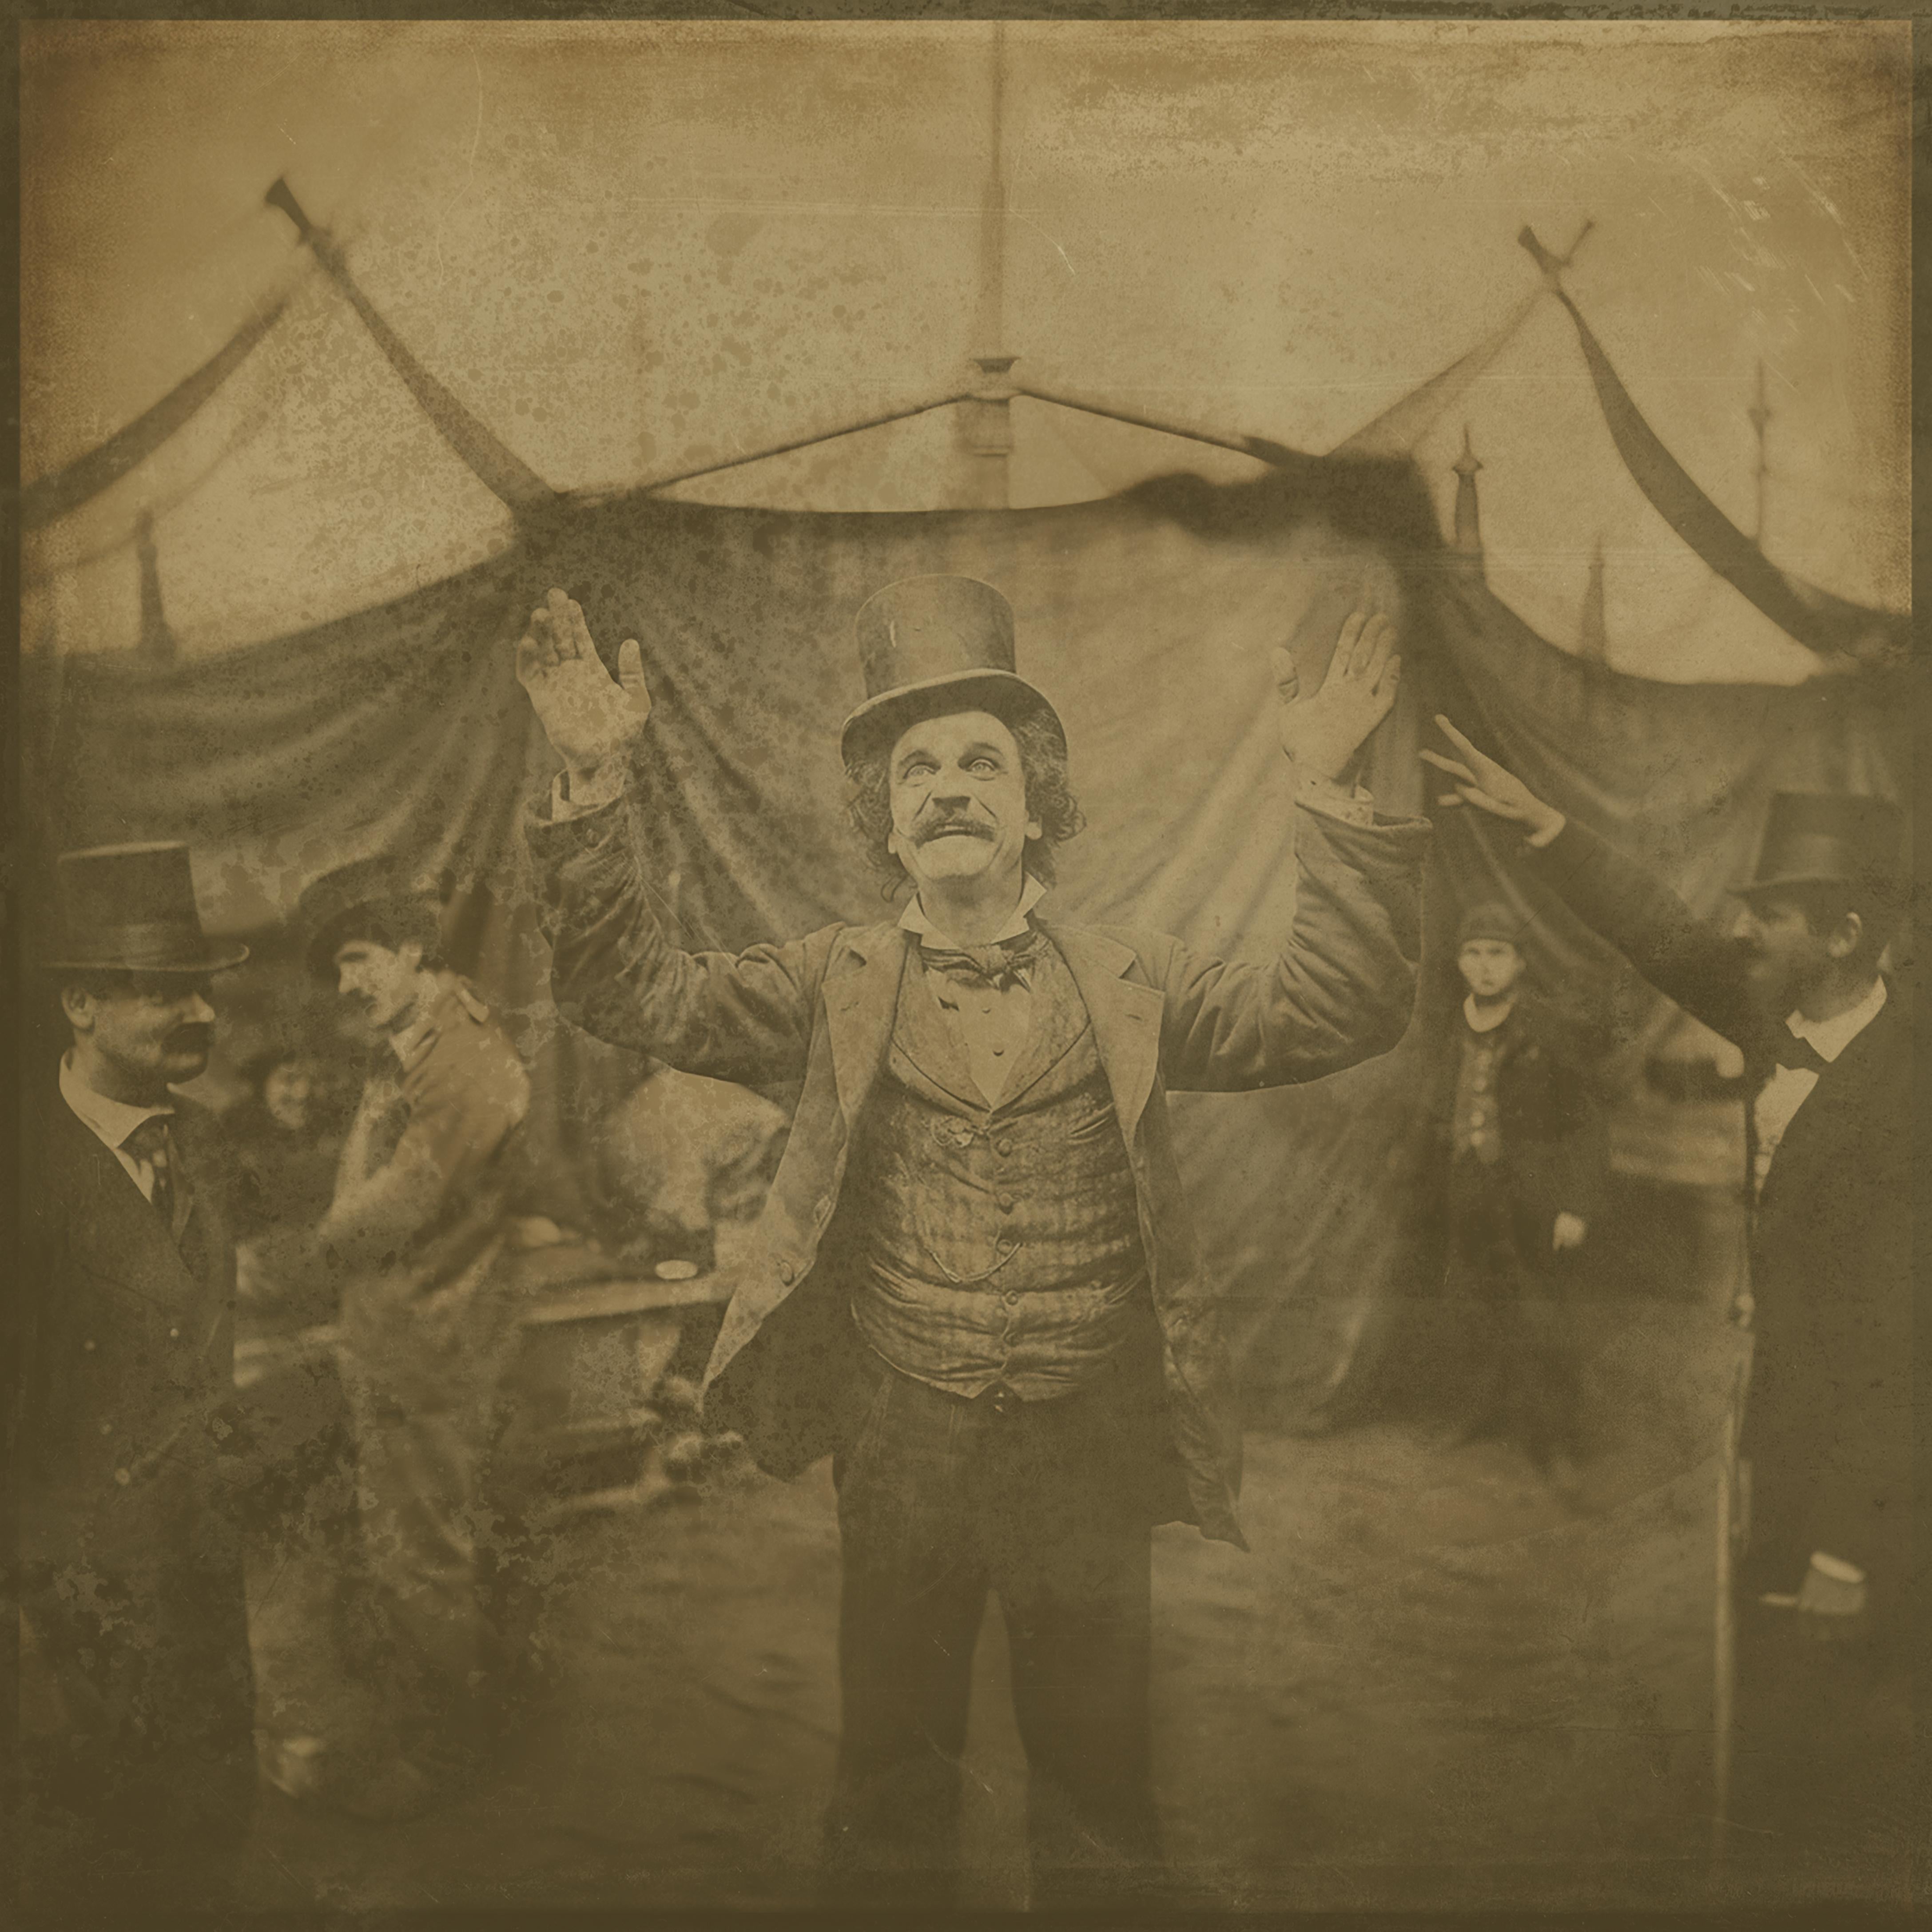 quartet of circus images  -exotic daguerreotype reproductions Framed - Surrealist Photograph by FPA Francis Pavy Artist